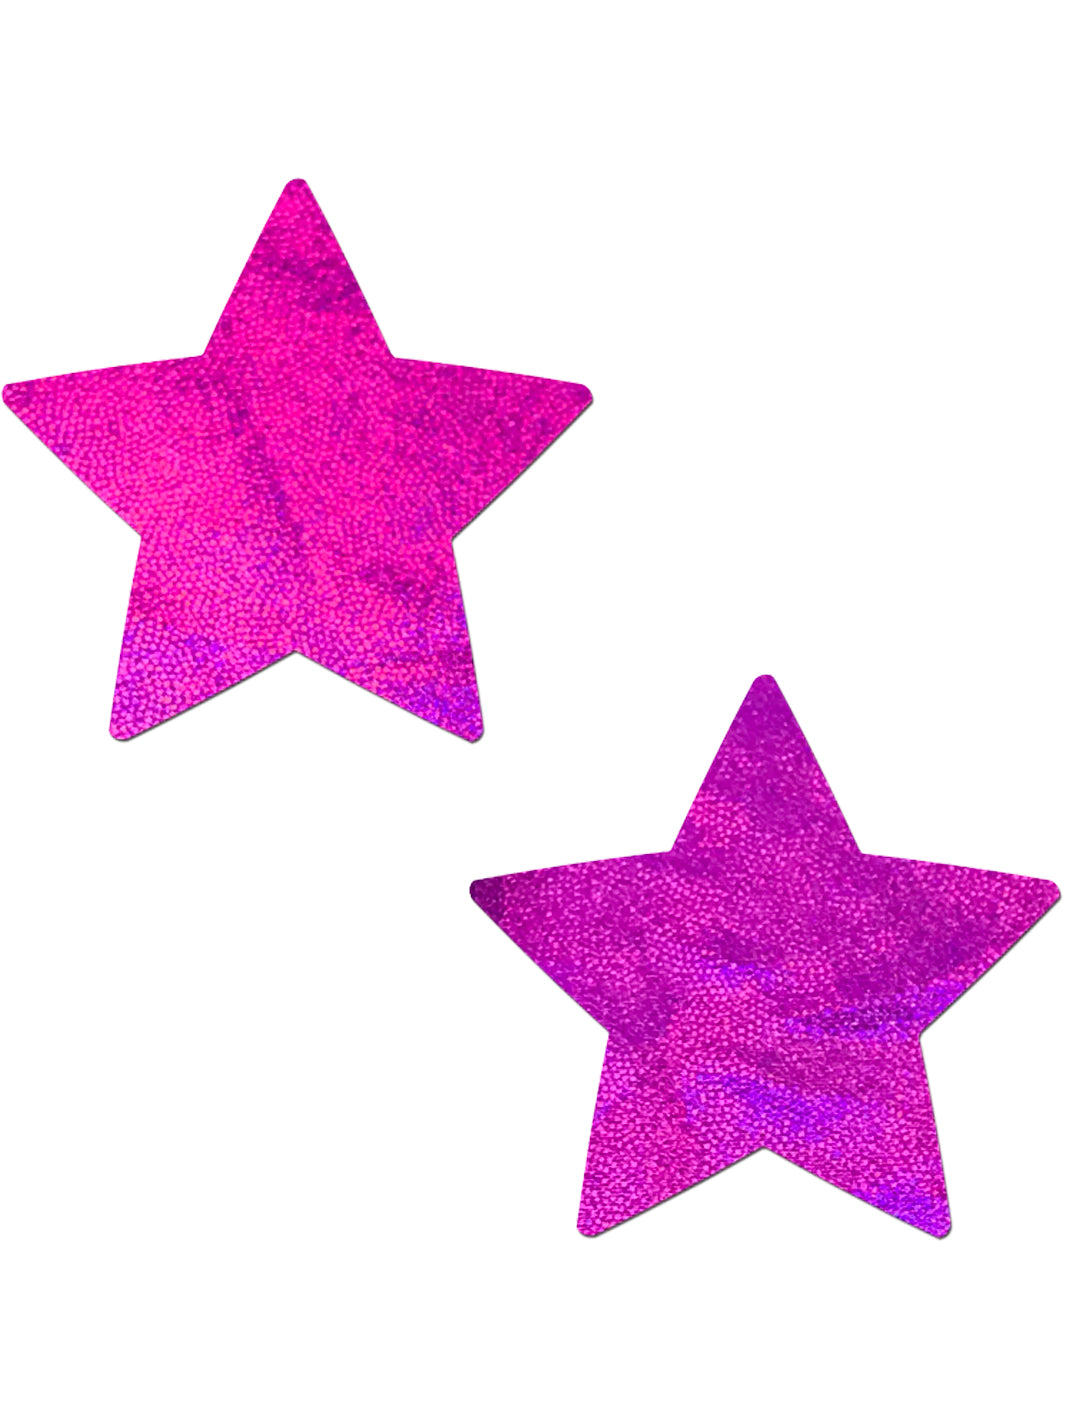 STAR HOLOGRAPHIC NIPPLE PASTIES - PINK